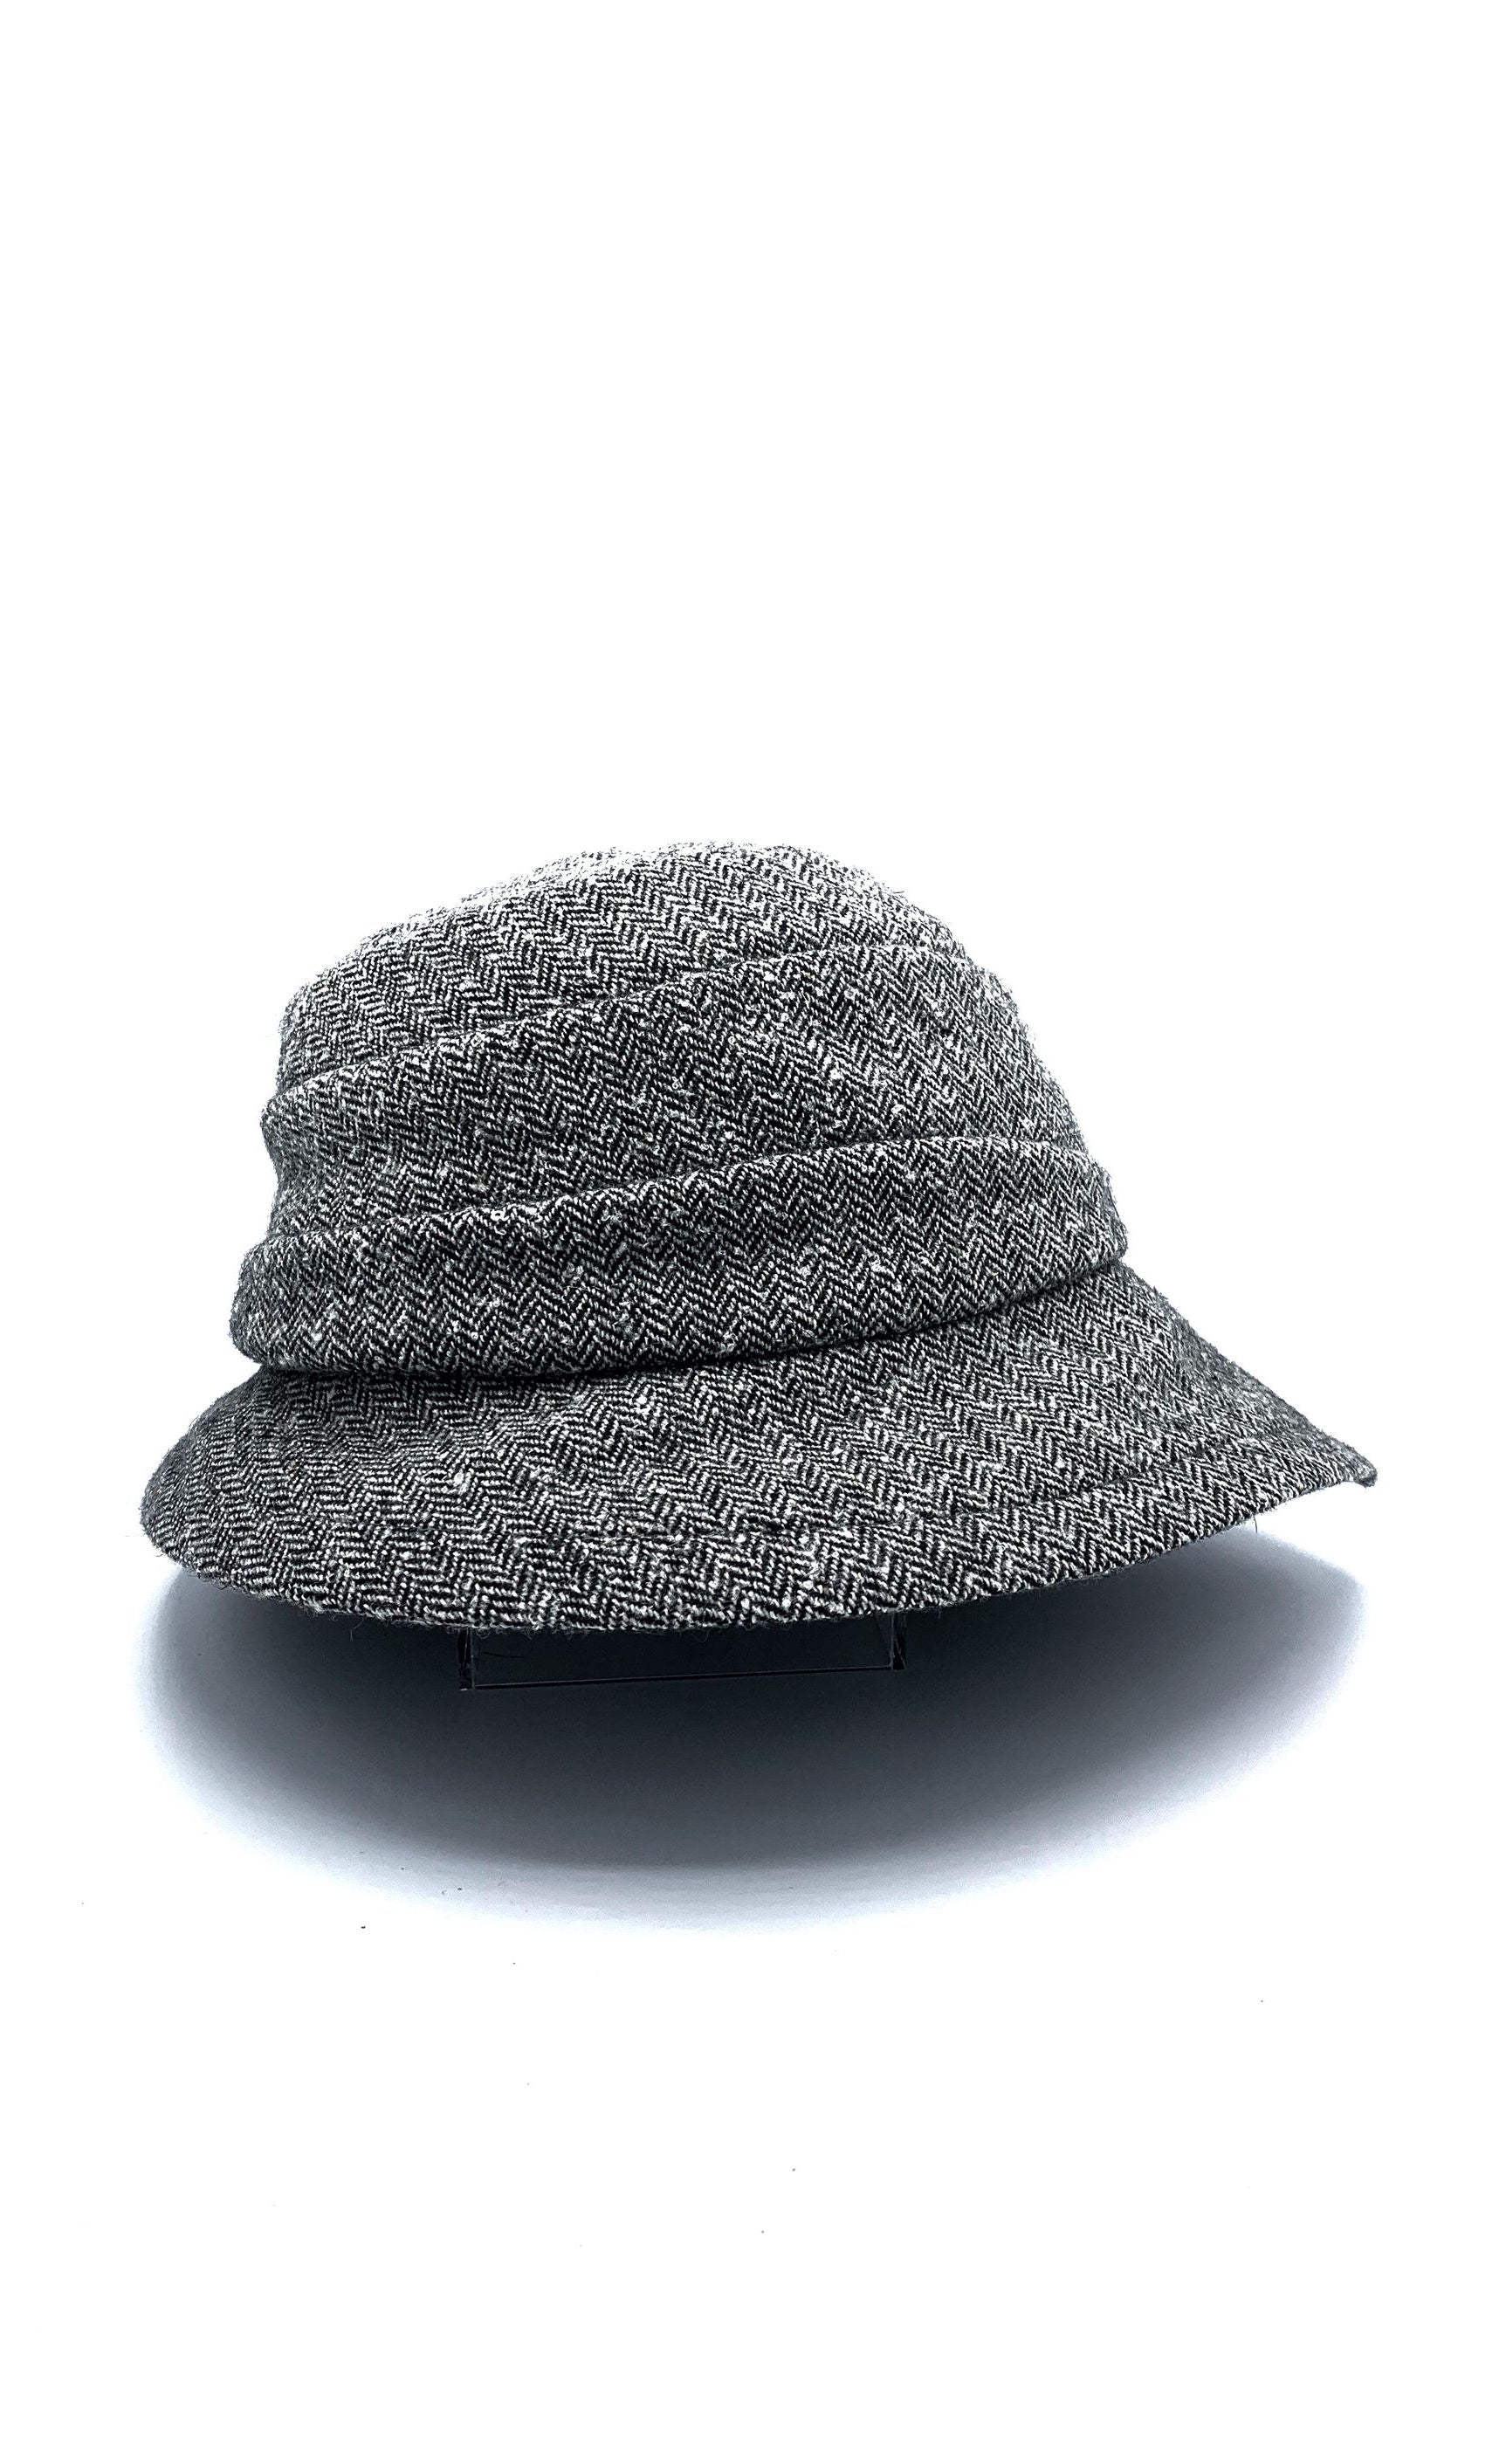 Right side view of the lillie & cohoe herringbone vintage phoebe hat. This hat has an asymmetrical pointed brim, a layered crown, and a grey herringbone pattern.